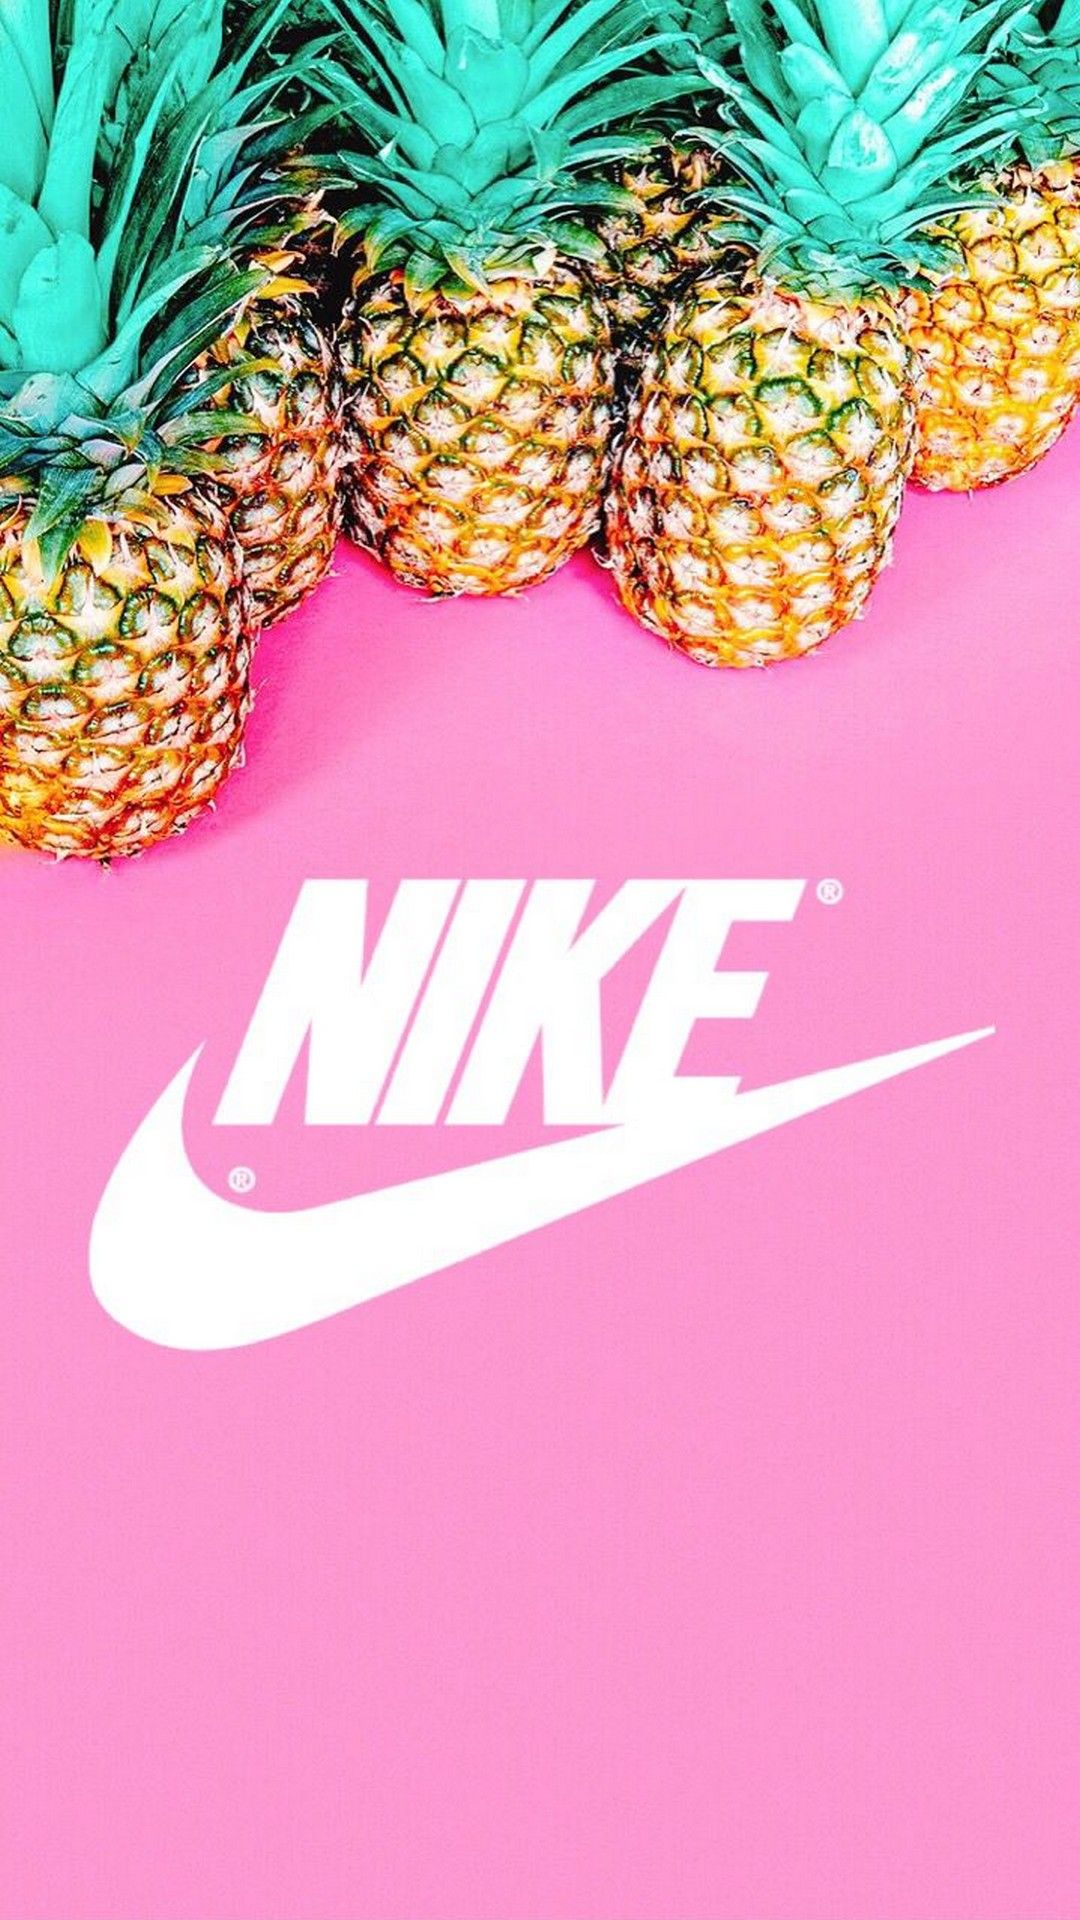 Pink Cute Pineapple Iphone Wallpapers